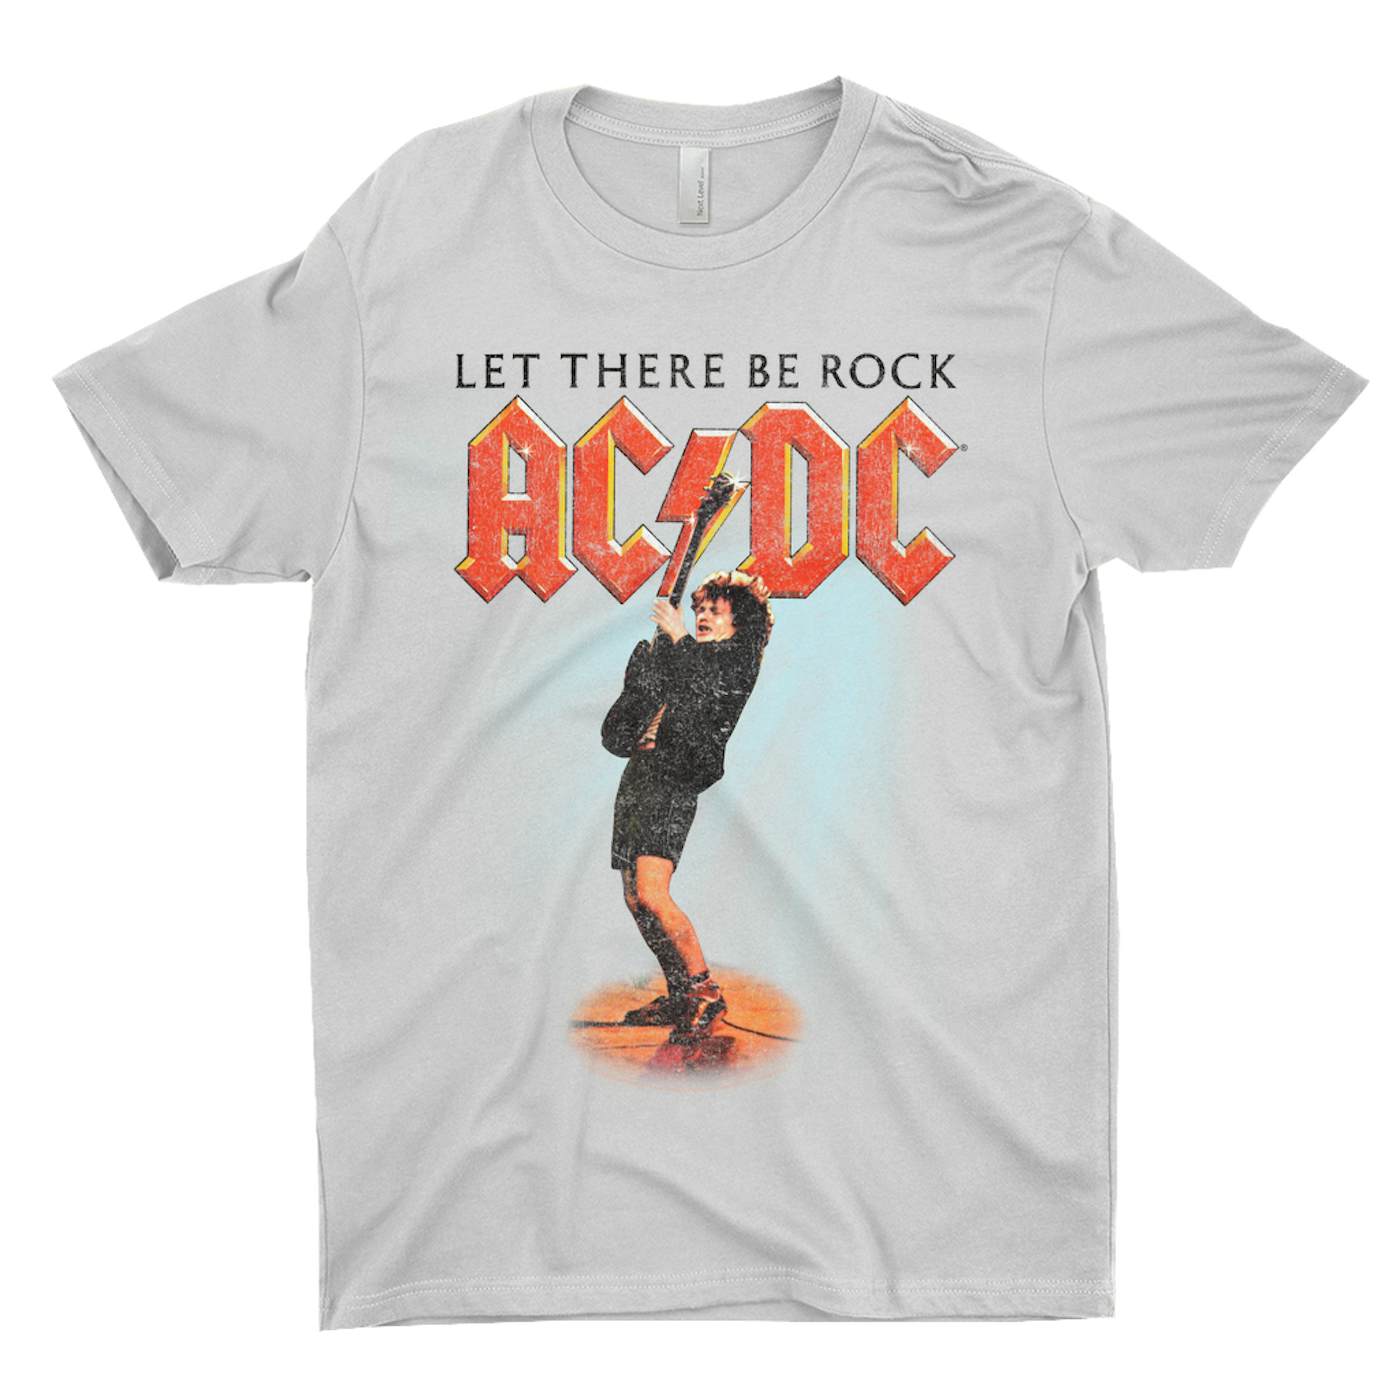 Can You Print an Album Cover on a Shirt?